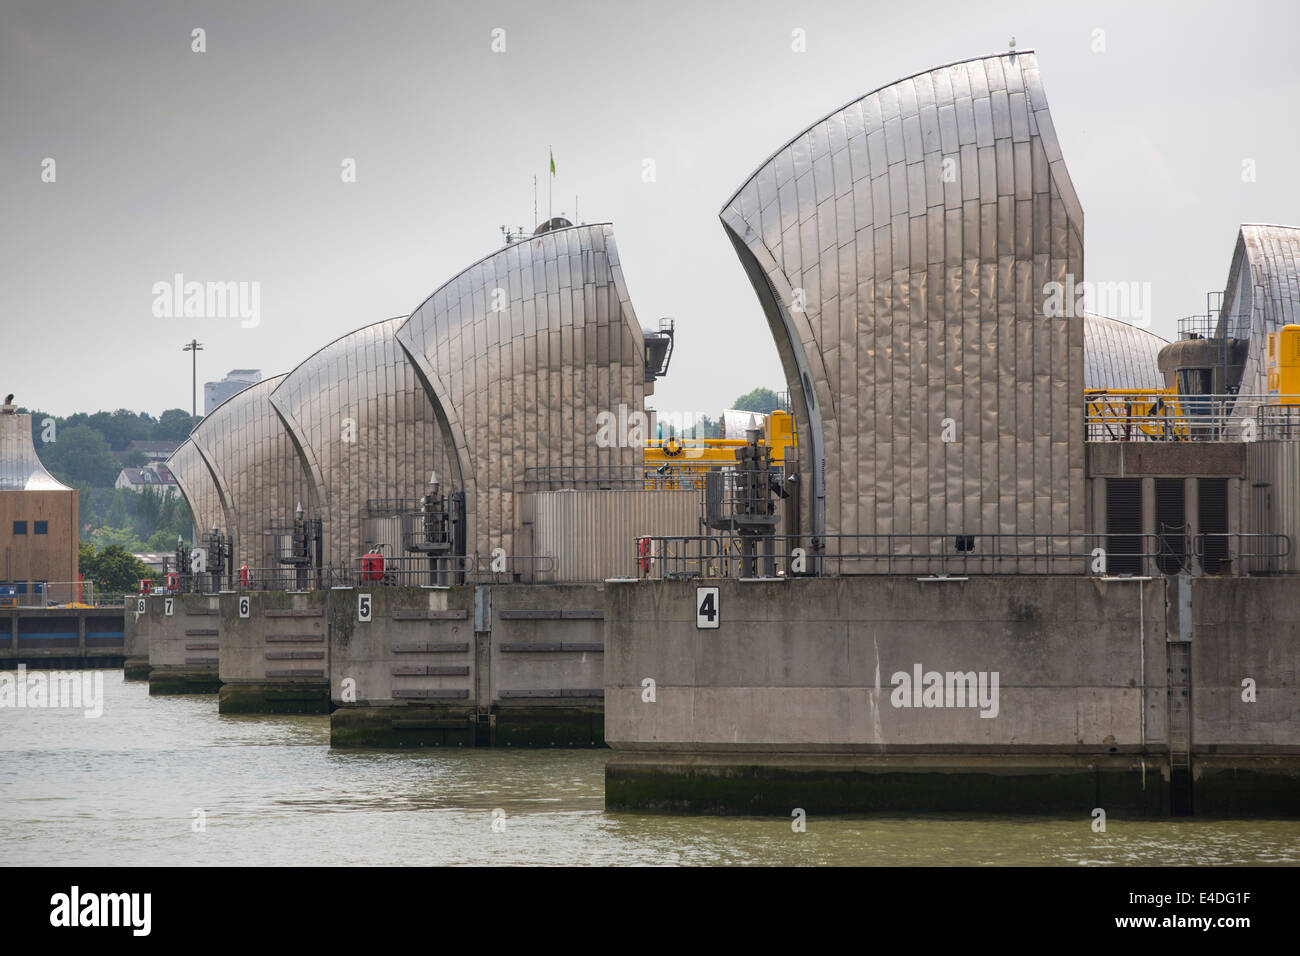 The Thames barrier on the River Thames in London. It was constructed to protect the capital city from storm surge flooding. Recent predictions show it will probably be redundant in around twenty years due to increased stormy weather and sea level rise driven by climate change. Stock Photo